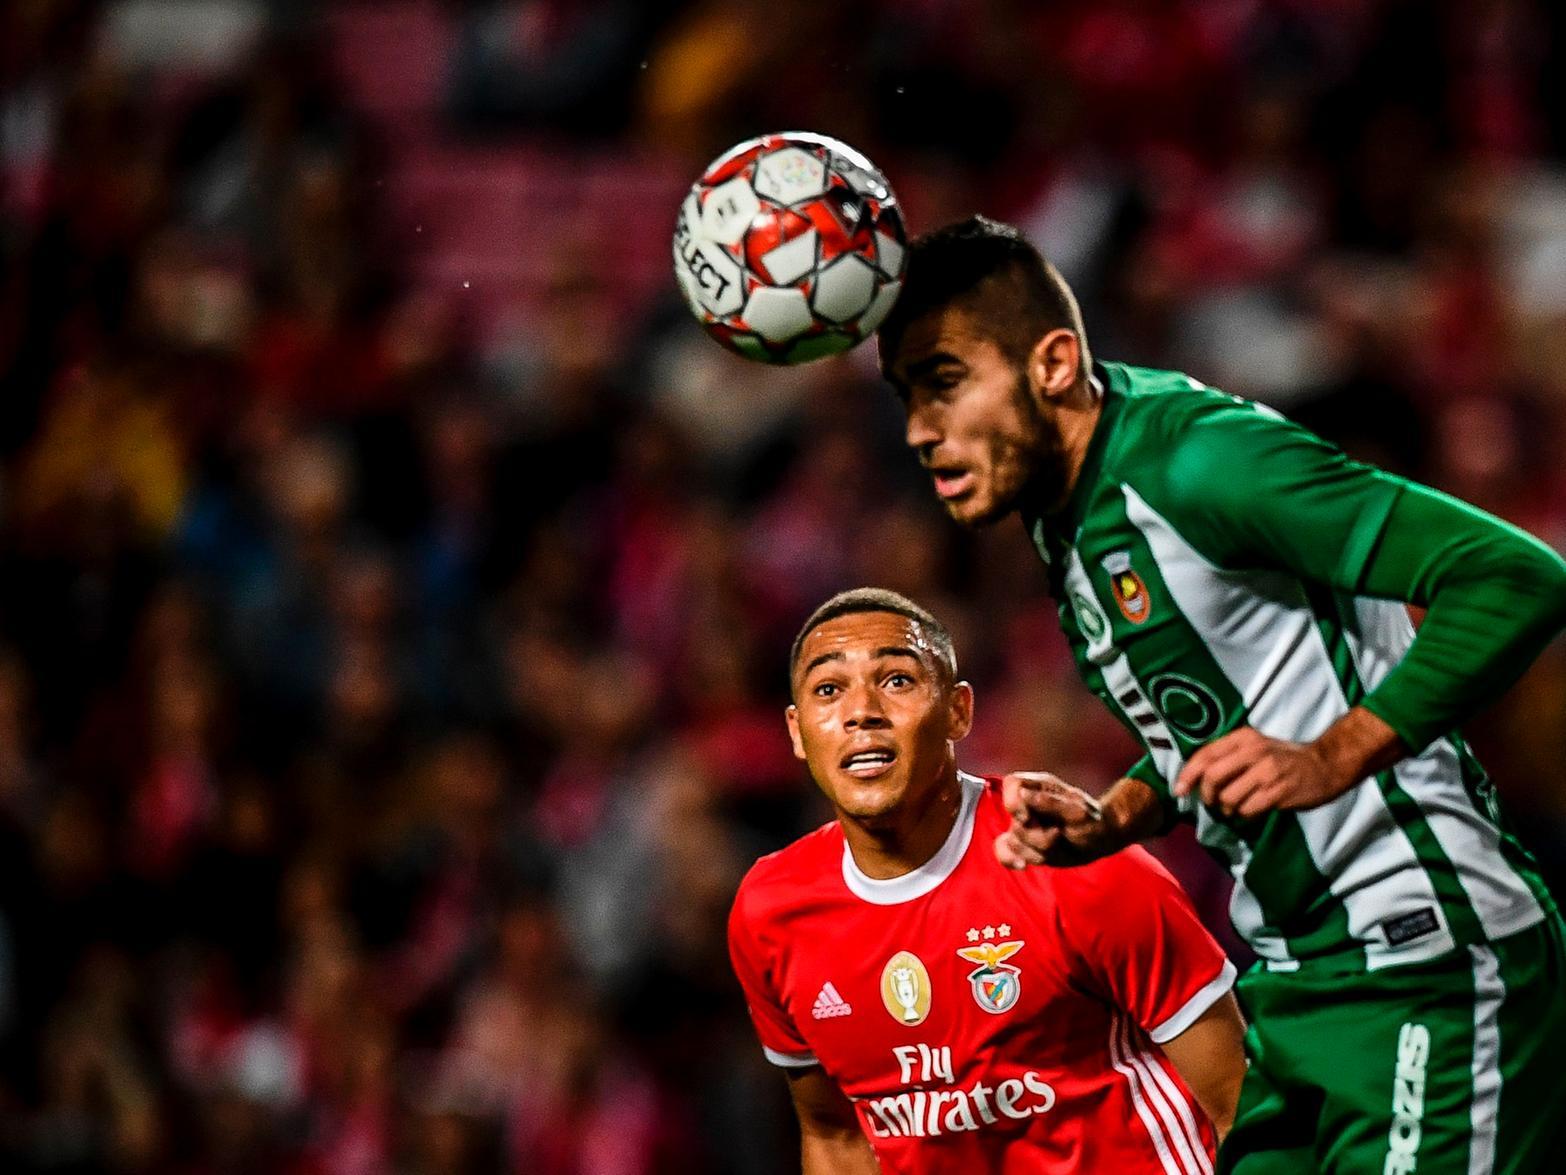 Blackburn Rovers are said to be leading the race to sign Rio Ave defender Toni Borevkovic. The Croatian centre-back is also rumoured to be a target for Bournemouth and Newcastle United. (A Bola)